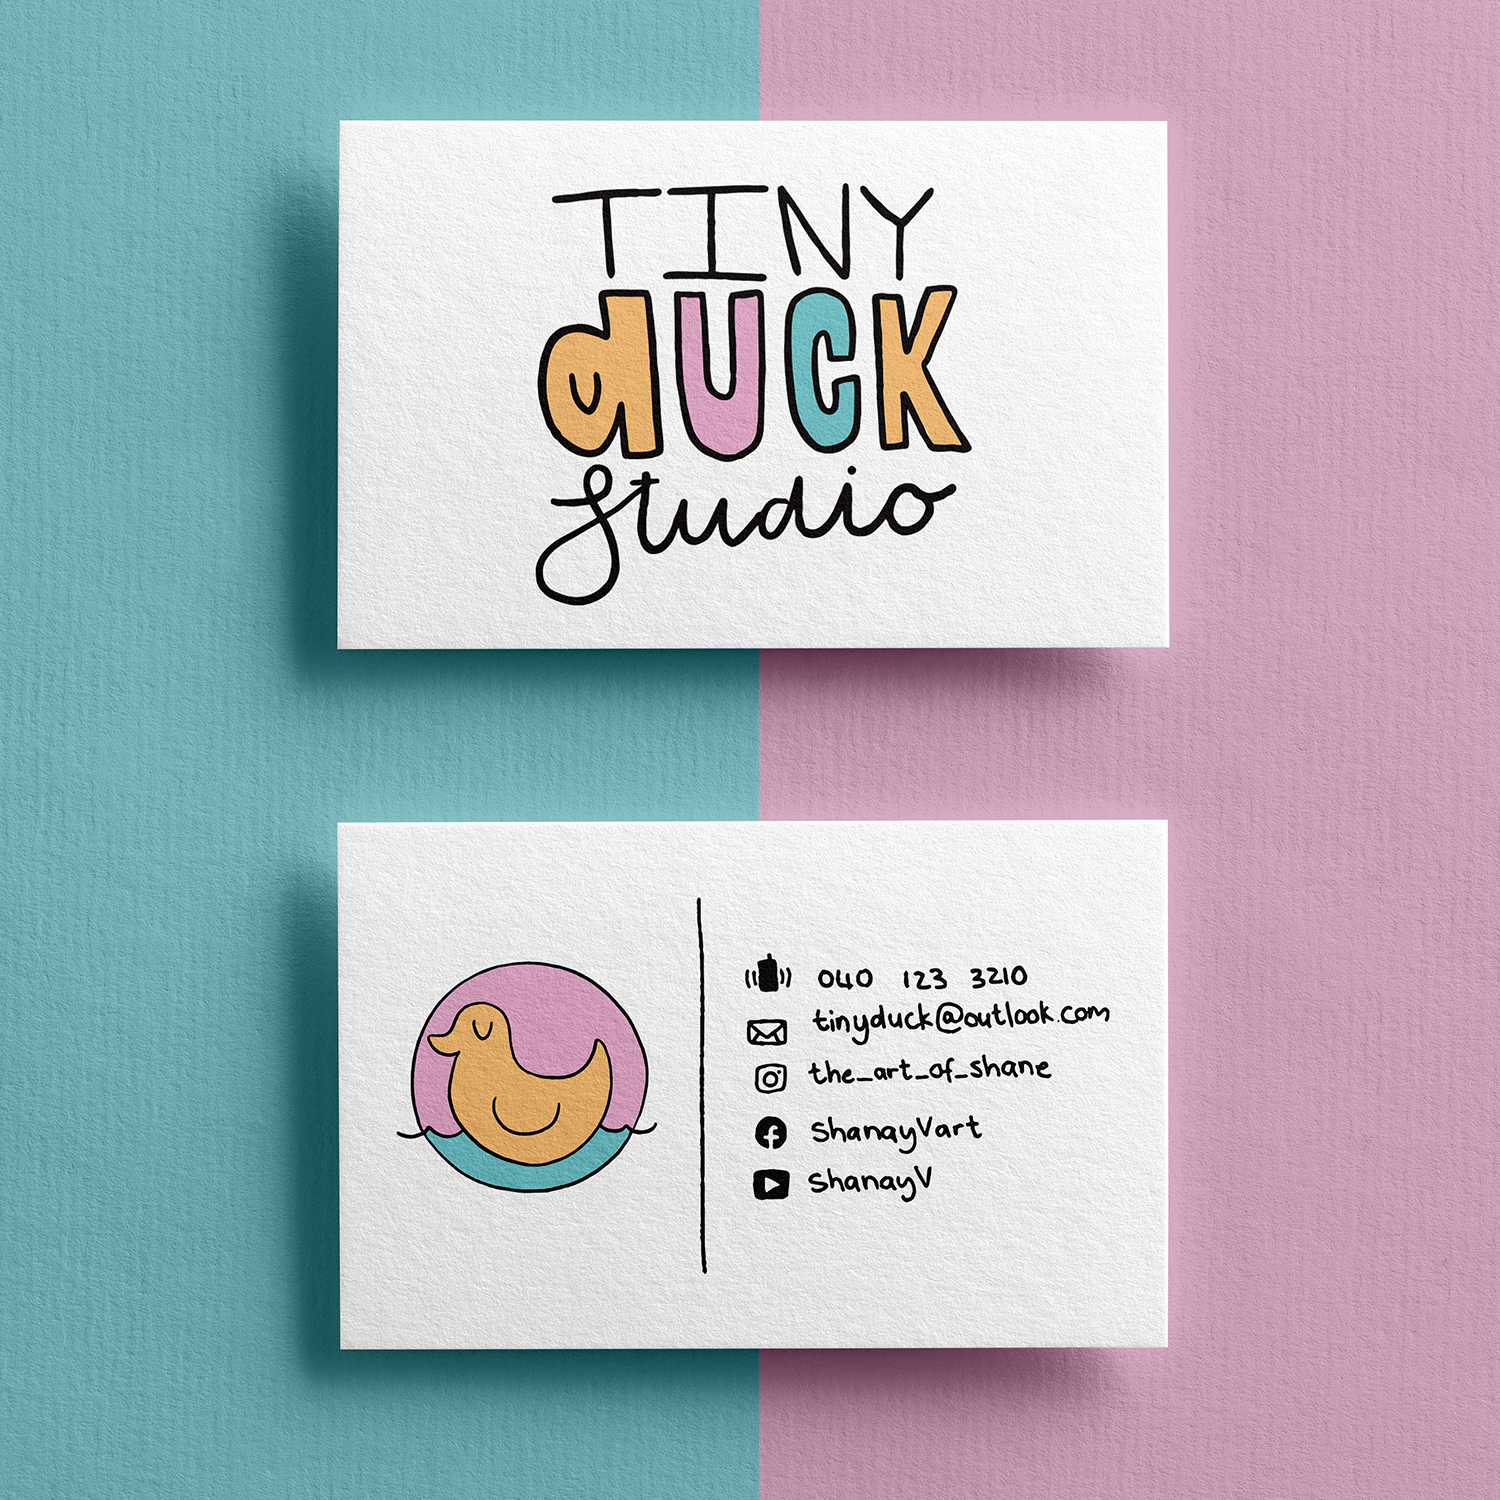 Business card for my design/illustration services